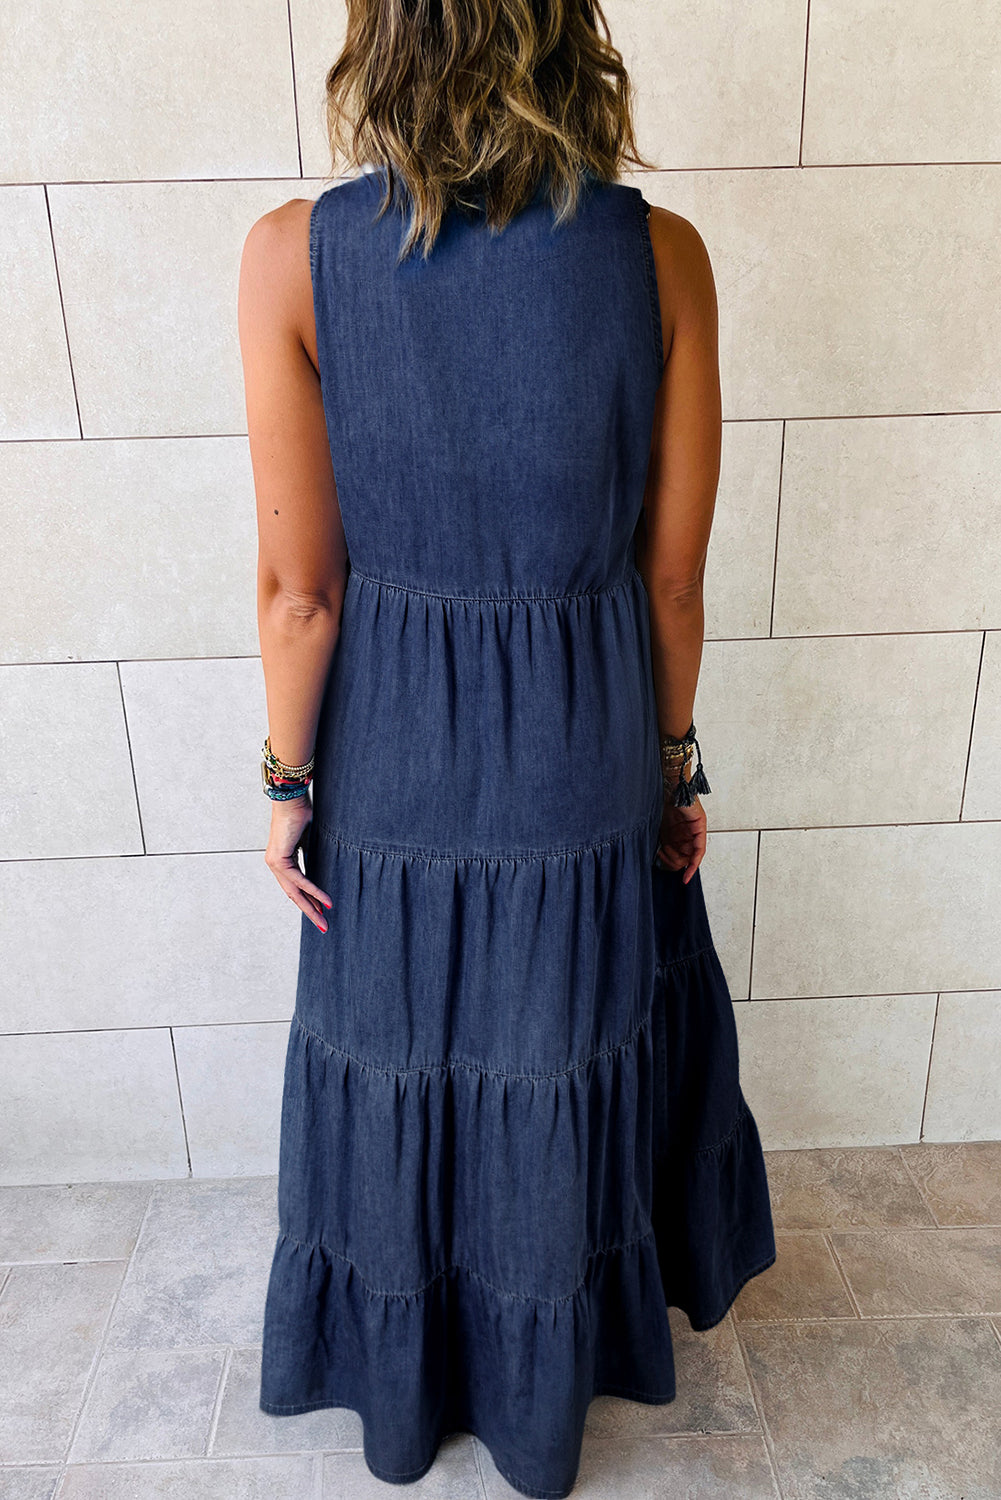 Blue Zone Planet |  Real Teal Sleeveless Tiered Chambray Maxi Dress Blue Zone Planet